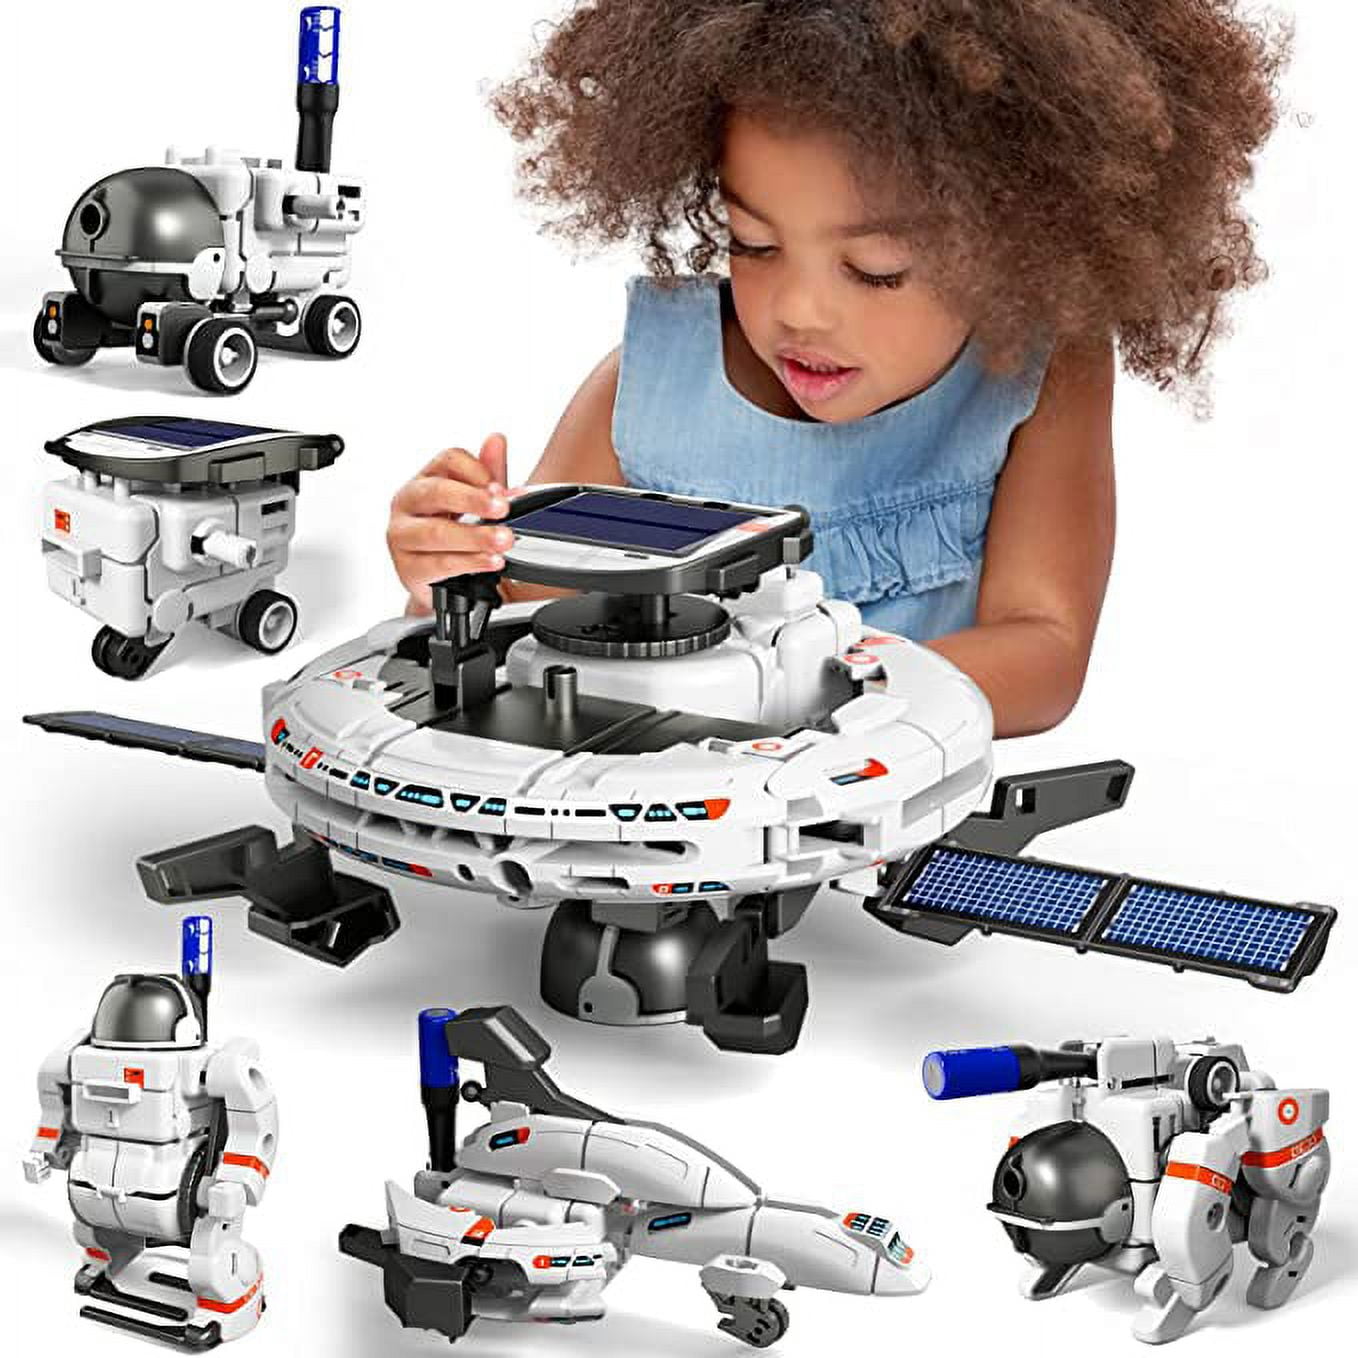 FOCUSSEXY Science Kits for Kids Age 8-12 STEM Toys 6-in-1 Space Solar Robot  Kit,Educatoinal Learning STEM Projects DIY Educational Science Kits  Christmas Birthday Gifts for Boy Age 8 9 10 11 12 